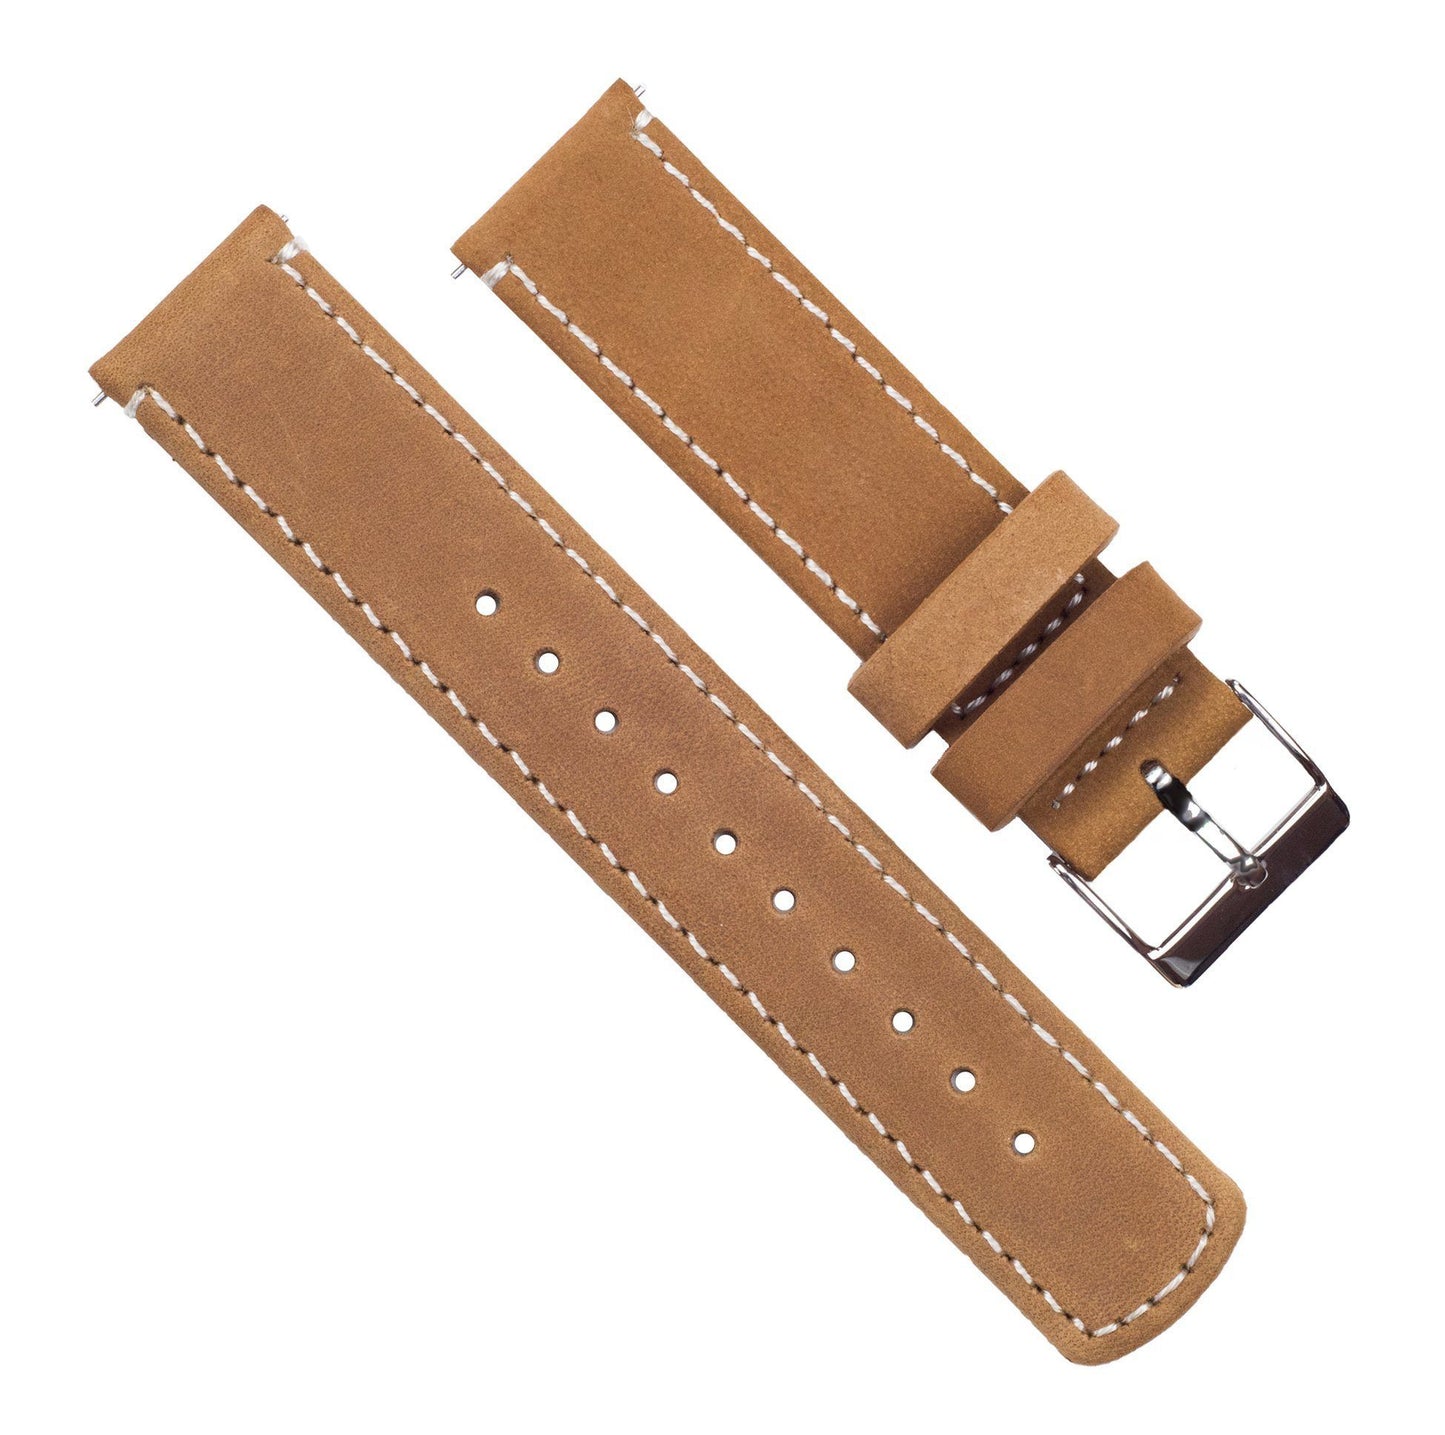 Samsung Galaxy Watch | Gingerbread Brown Leather & Linen White Stitching - Barton Watch Bands